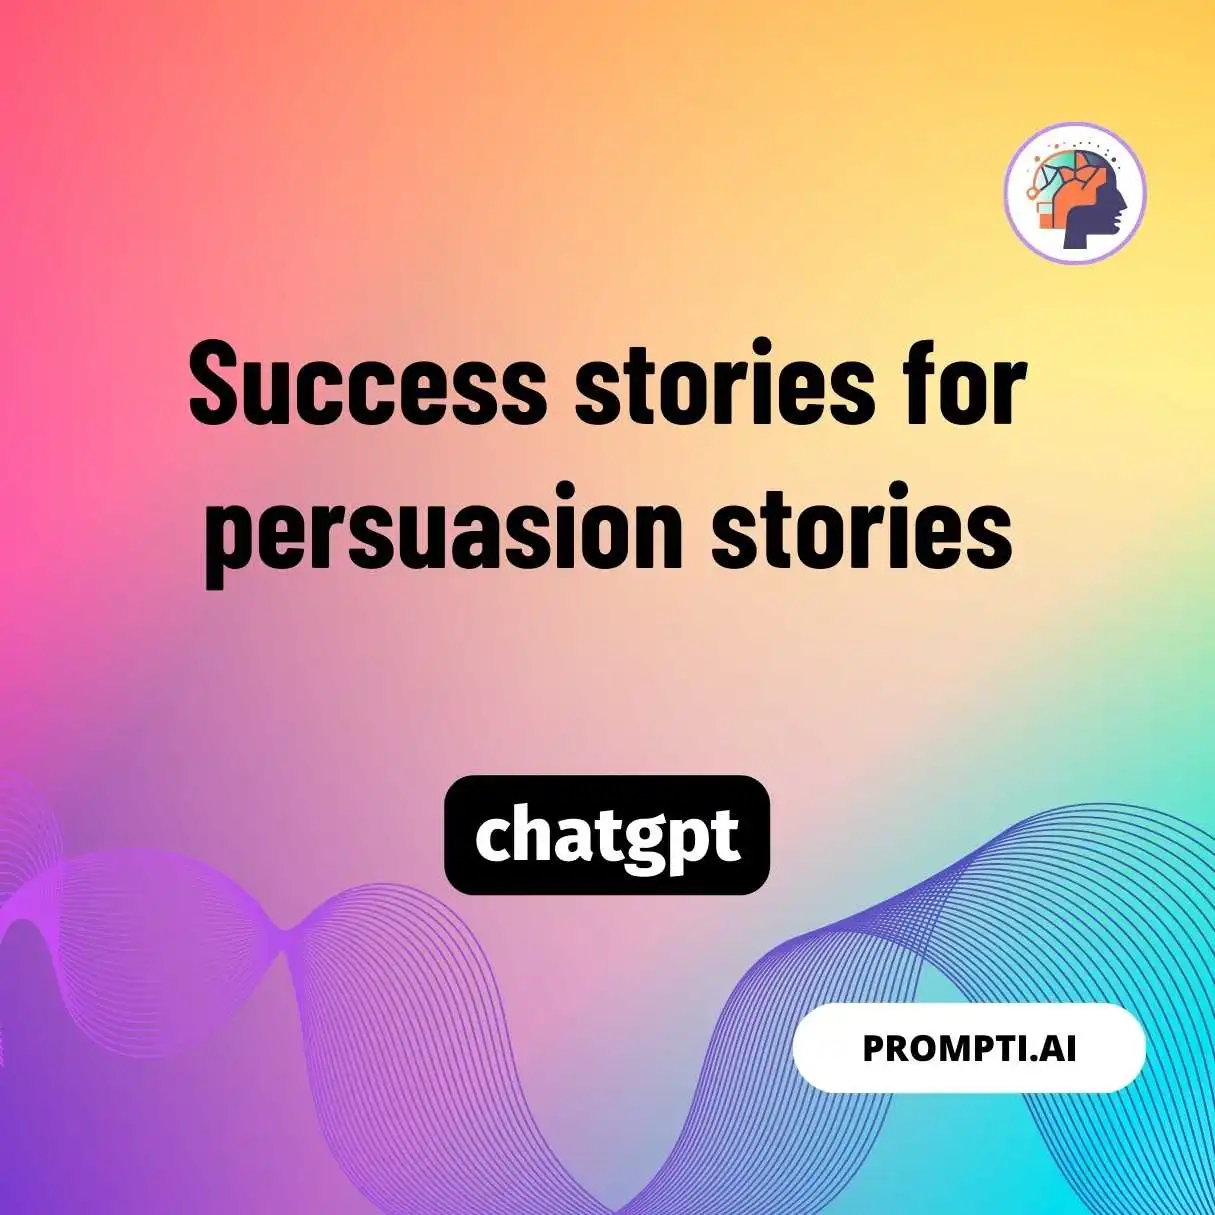 Success stories for persuasion stories